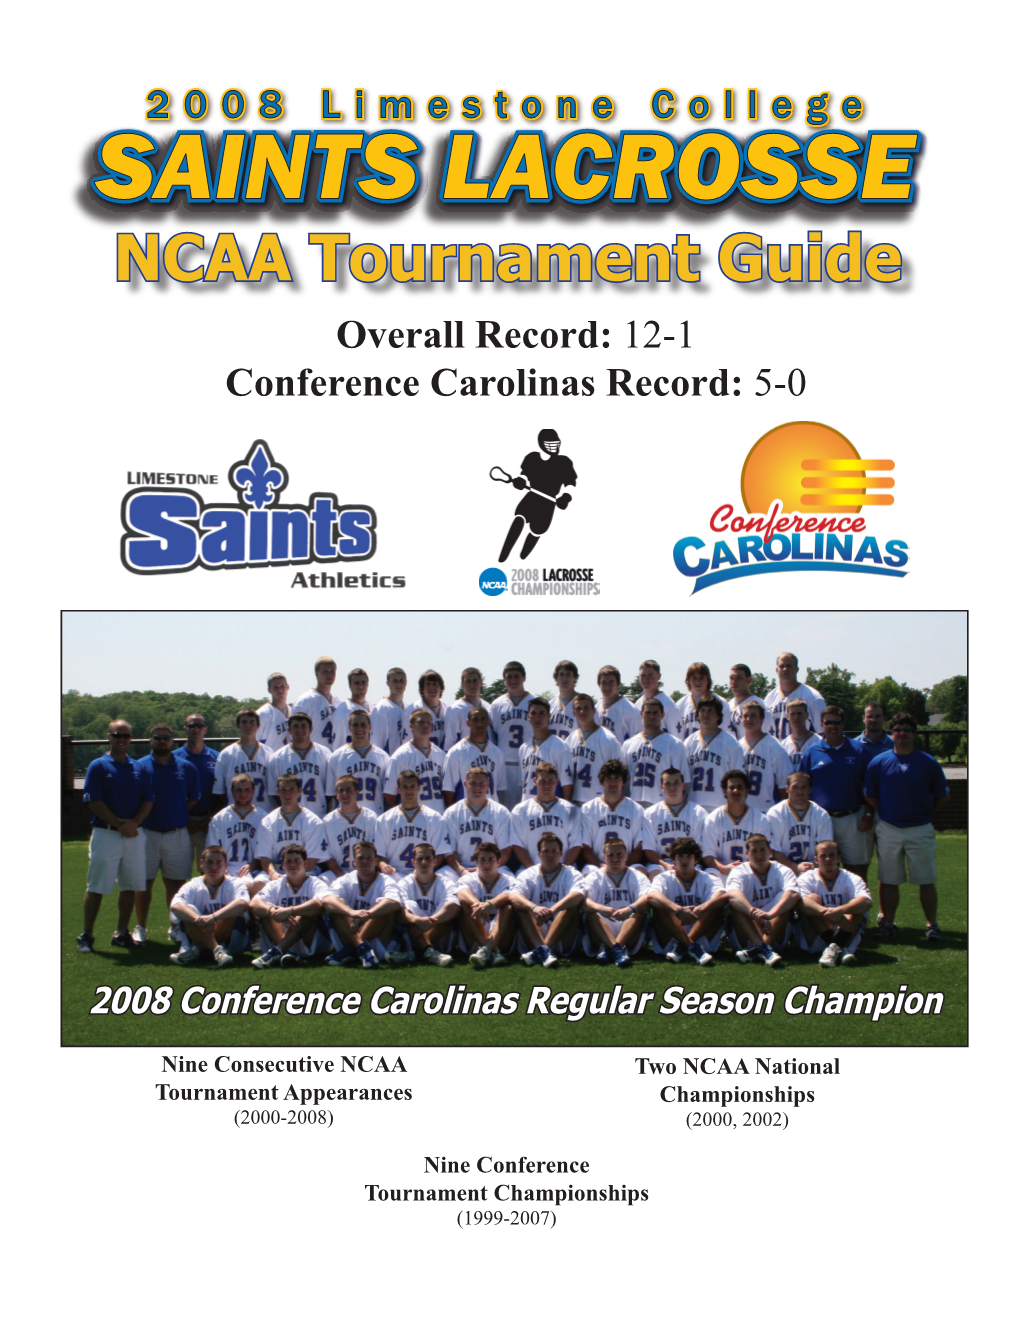 SAINTS LACROSSE NCAA Tournament Guide Overall Record: 12-1 Conference Carolinas Record: 5-0